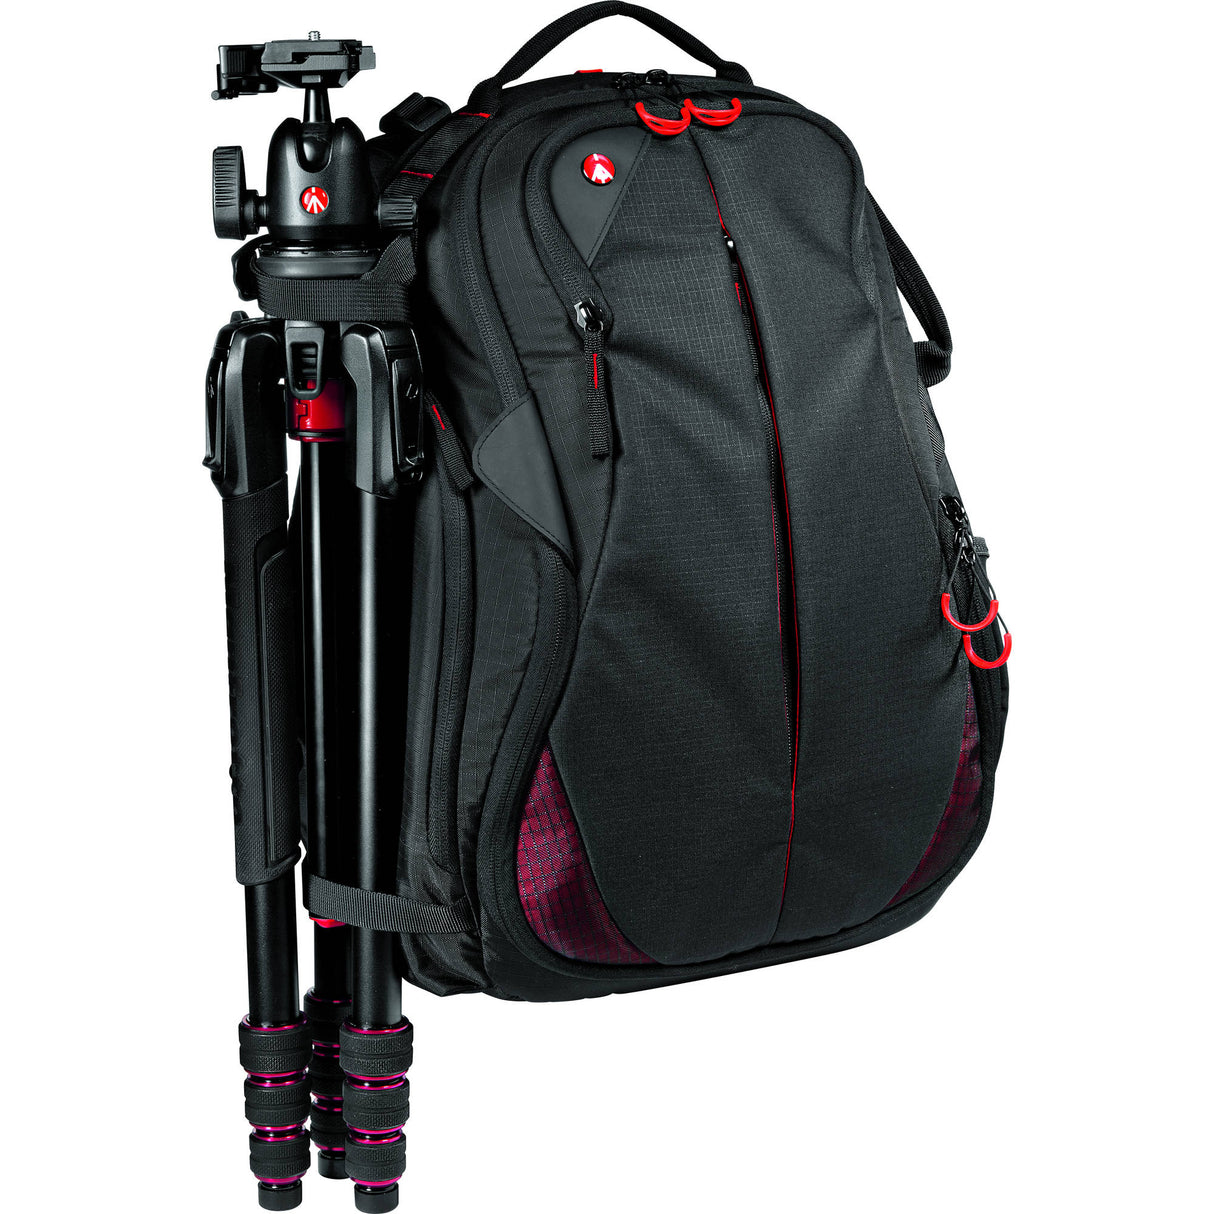 Manfrotto Pro Light Bumblebee-130 Camera Backpack (Black)